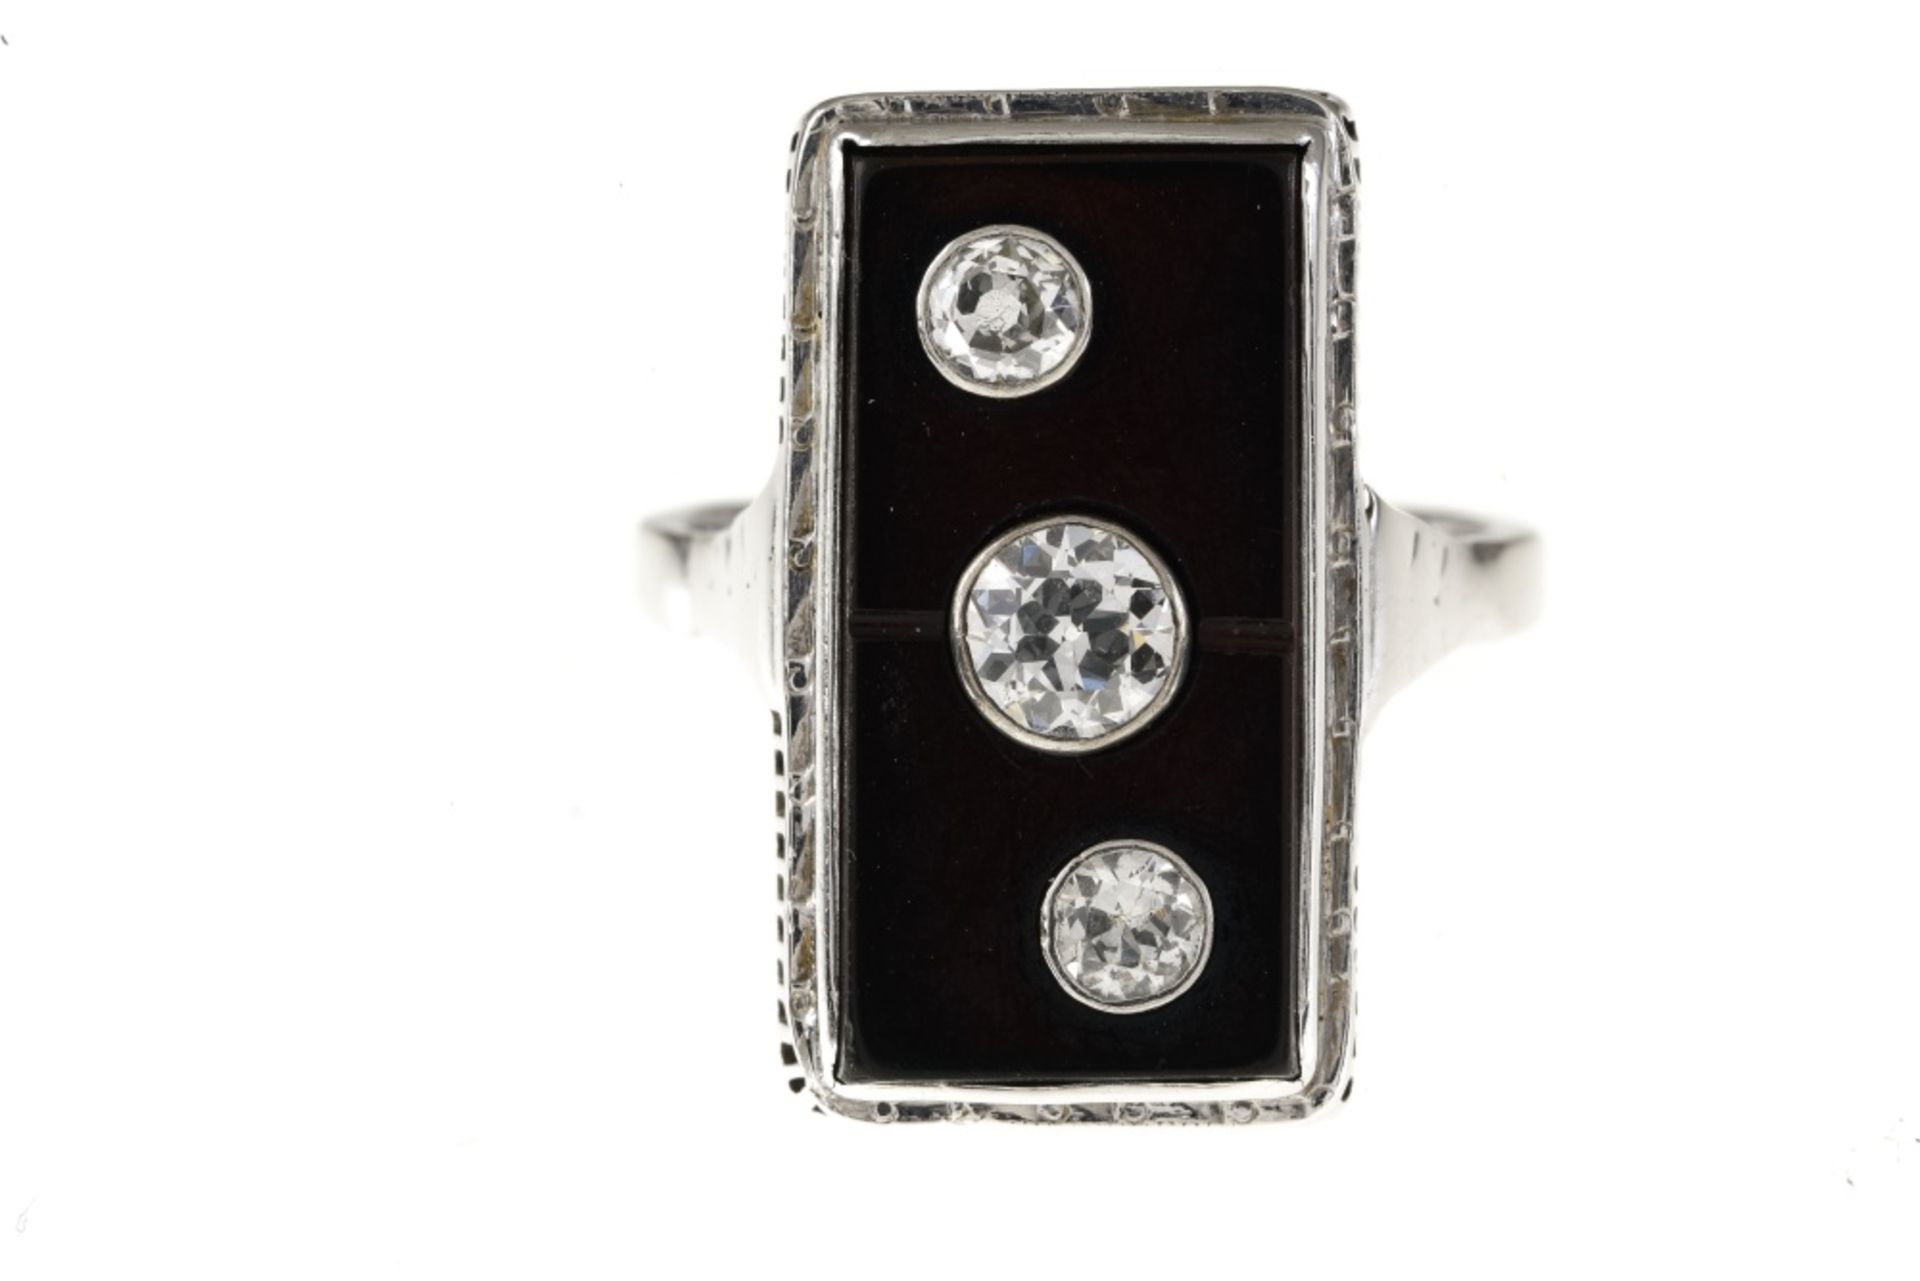 "Domino" ring 14 kt white gold, the rectangular plaque is made of onyx, depicting a domino set with